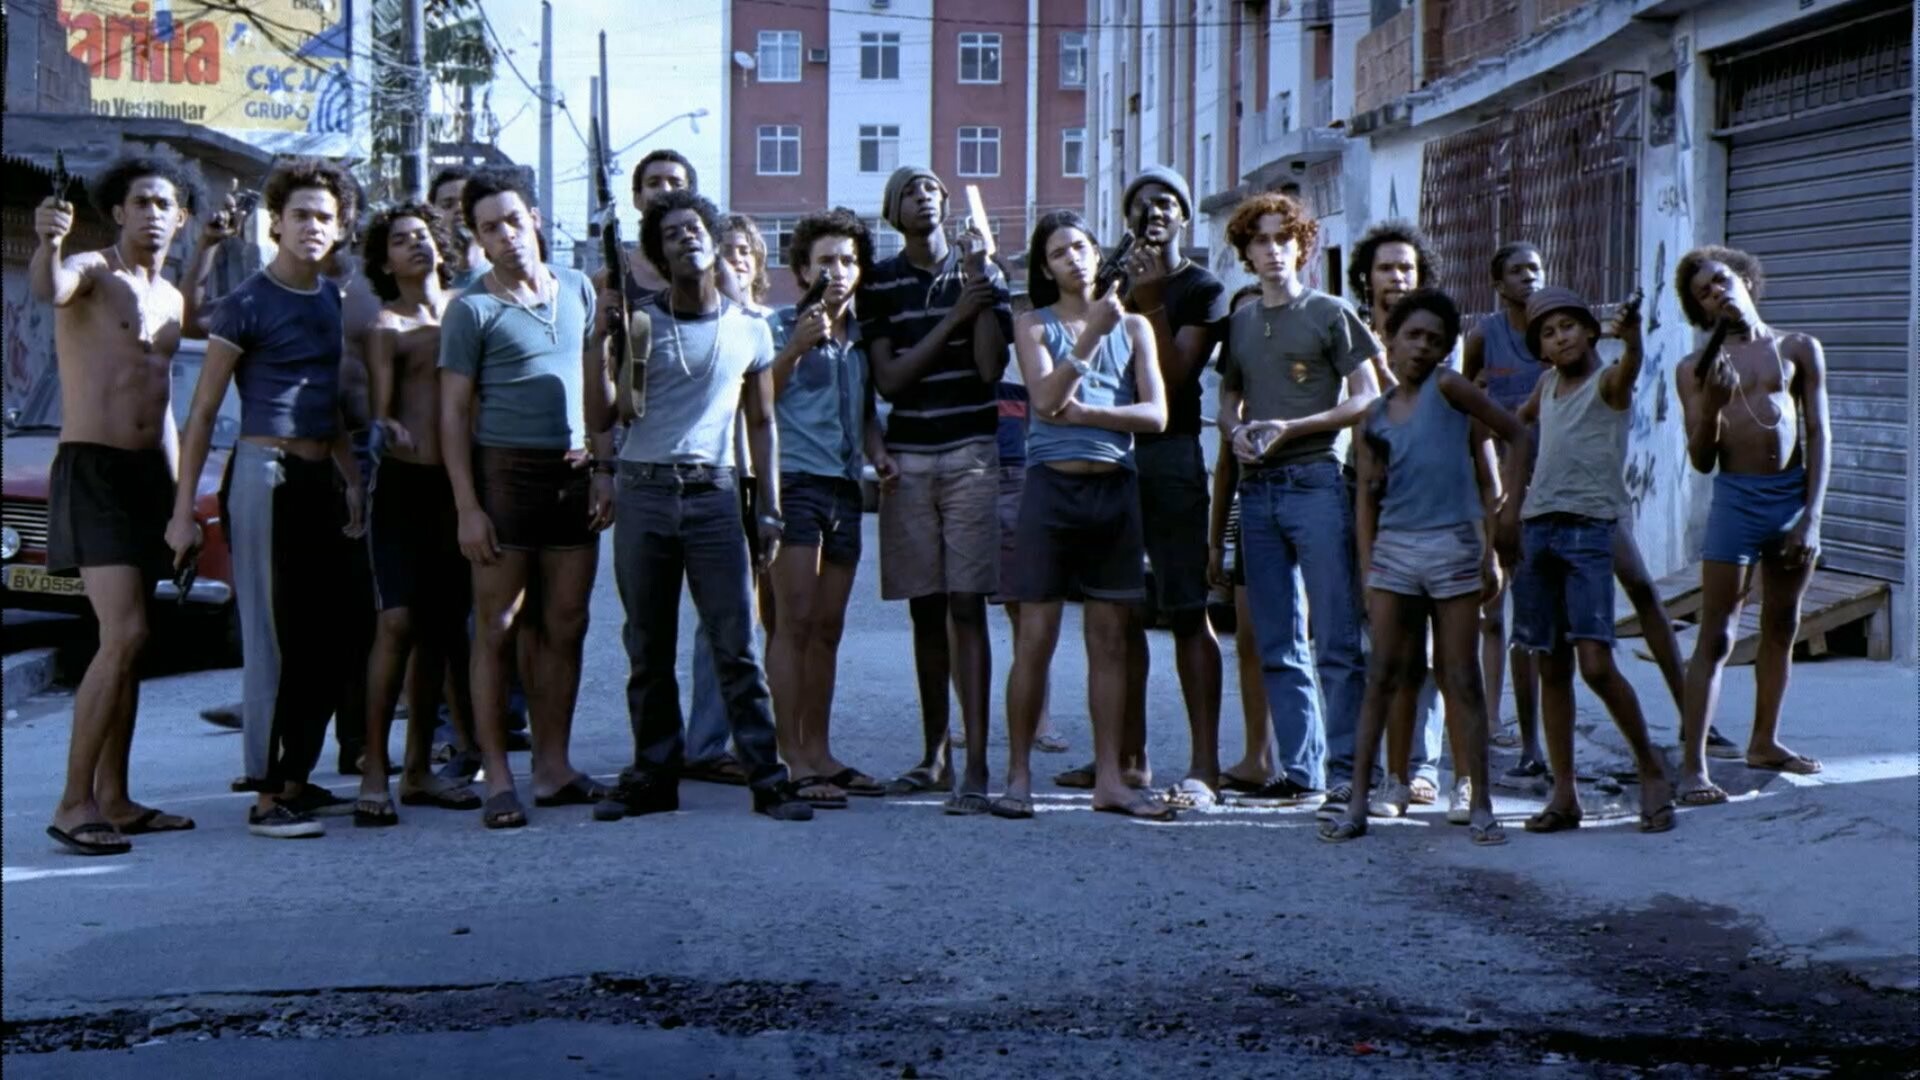 City of God: The film depicts the growth of organized crime in the Cidade de Deus suburb of Rio de Janeiro. 1920x1080 Full HD Background.